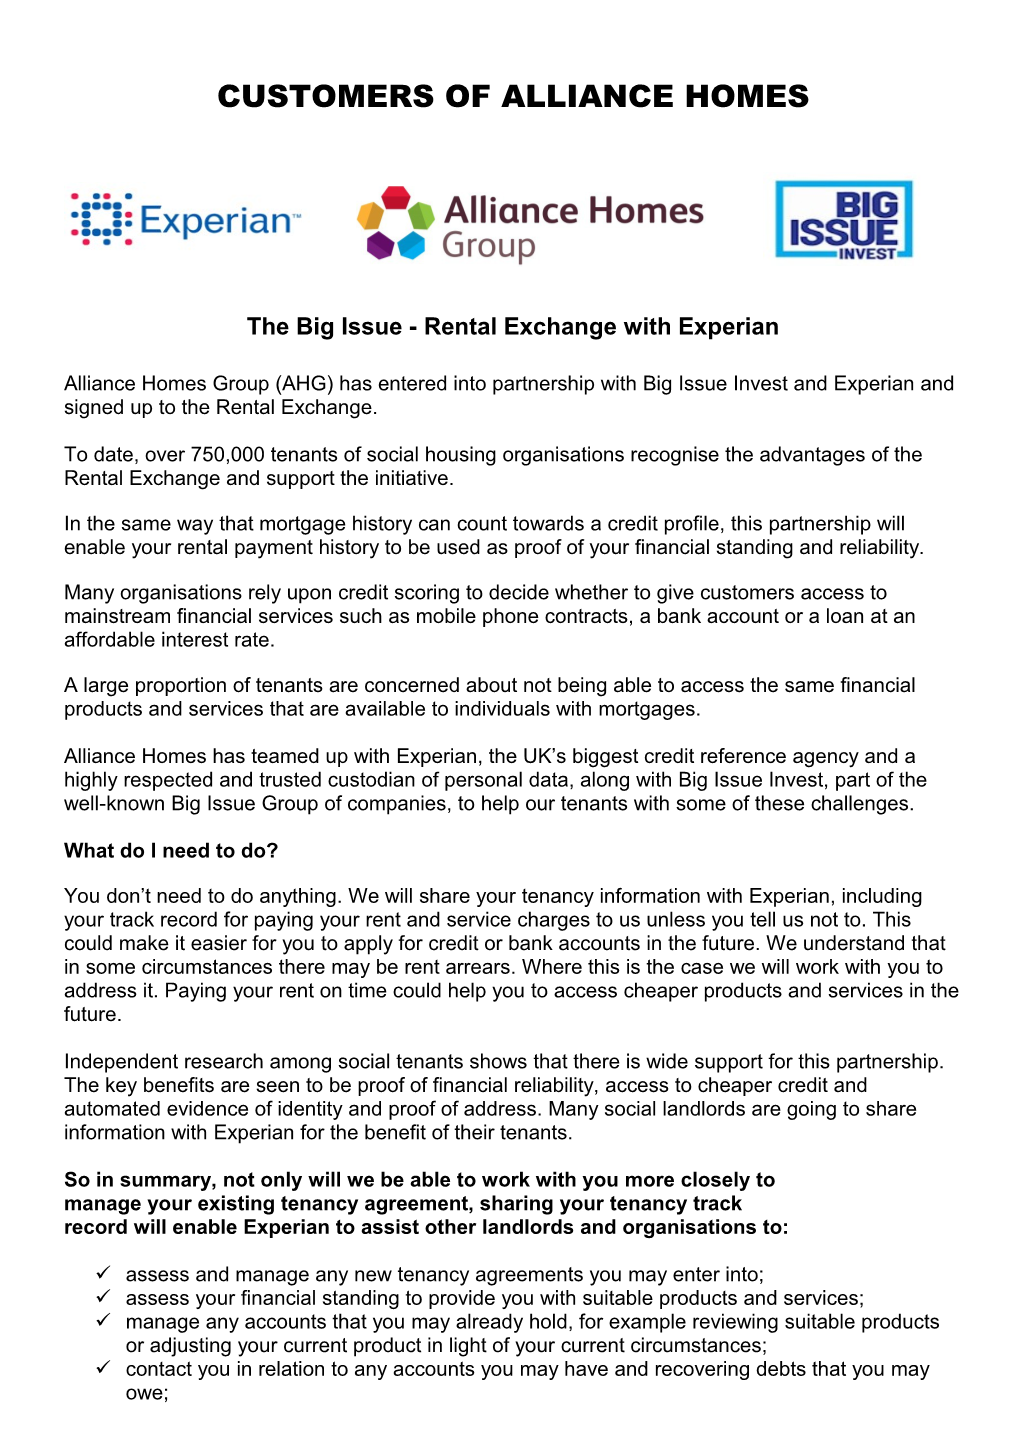 The Big Issue - Rental Exchange with Experian